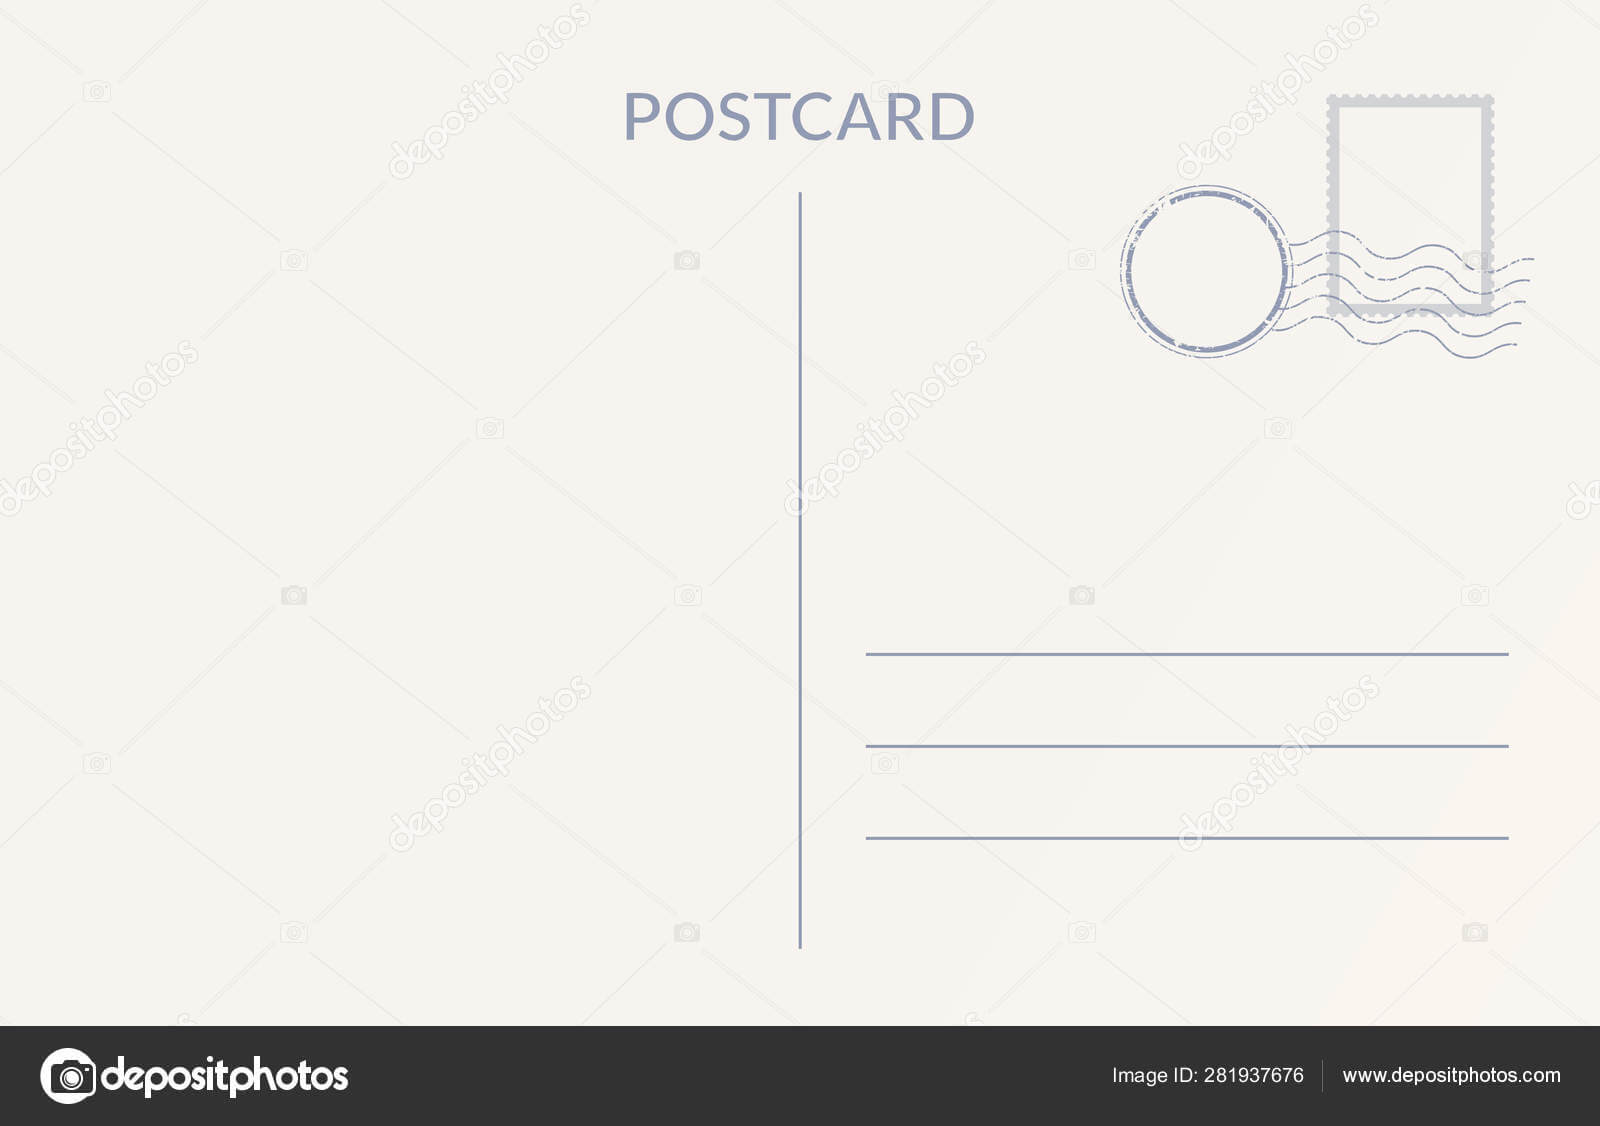 Empty Postcard Template. Design Of Blank Post Card Back With Regard To Post Cards Template